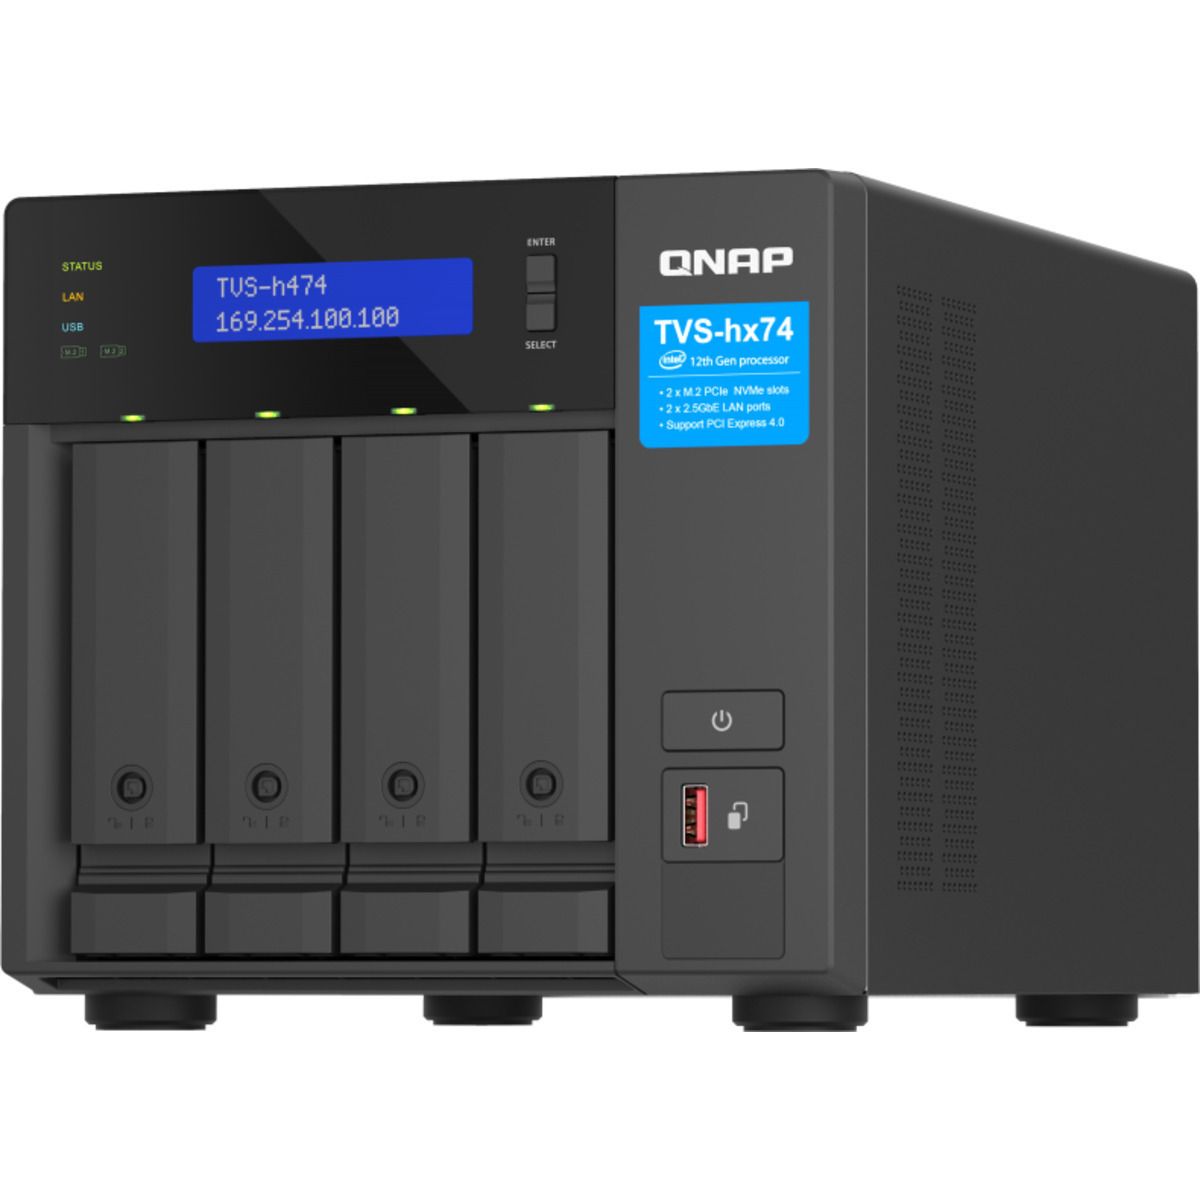 QNAP TVS-h474 Pentium Gold 20tb 4-Bay Desktop Multimedia / Power User / Business NAS - Network Attached Storage Device 2x10tb Western Digital Red Pro WD102KFBX 3.5 7200rpm SATA 6Gb/s HDD NAS Class Drives Installed - Burn-In Tested - FREE RAM UPGRADE TVS-h474 Pentium Gold